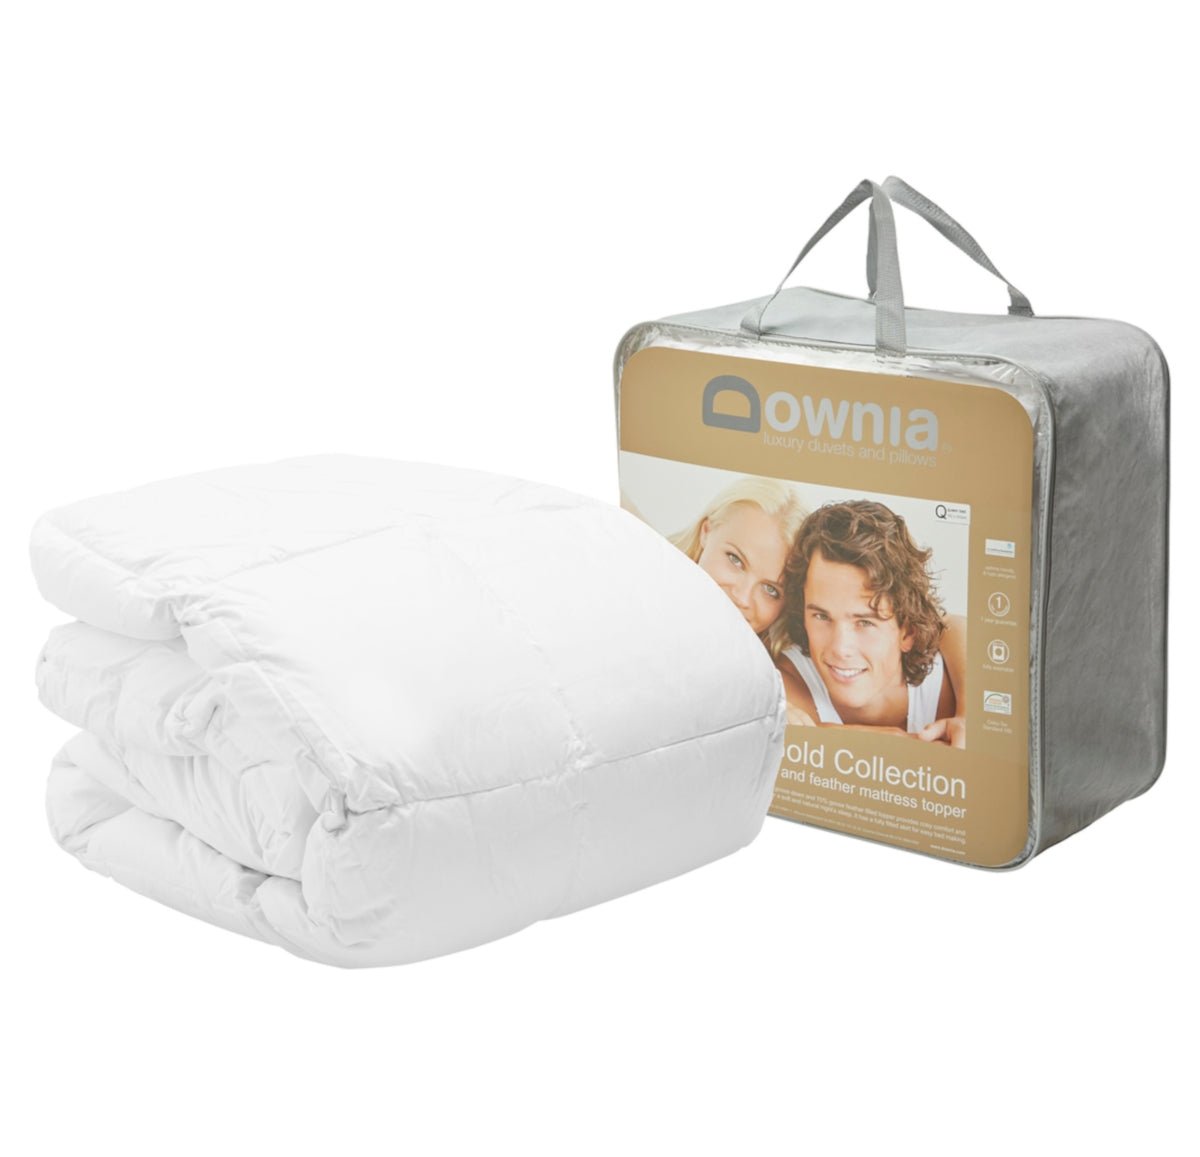 Downia Gold Collection Down and Feather Mattress Topper - Mattress & Pillow ScienceToppers